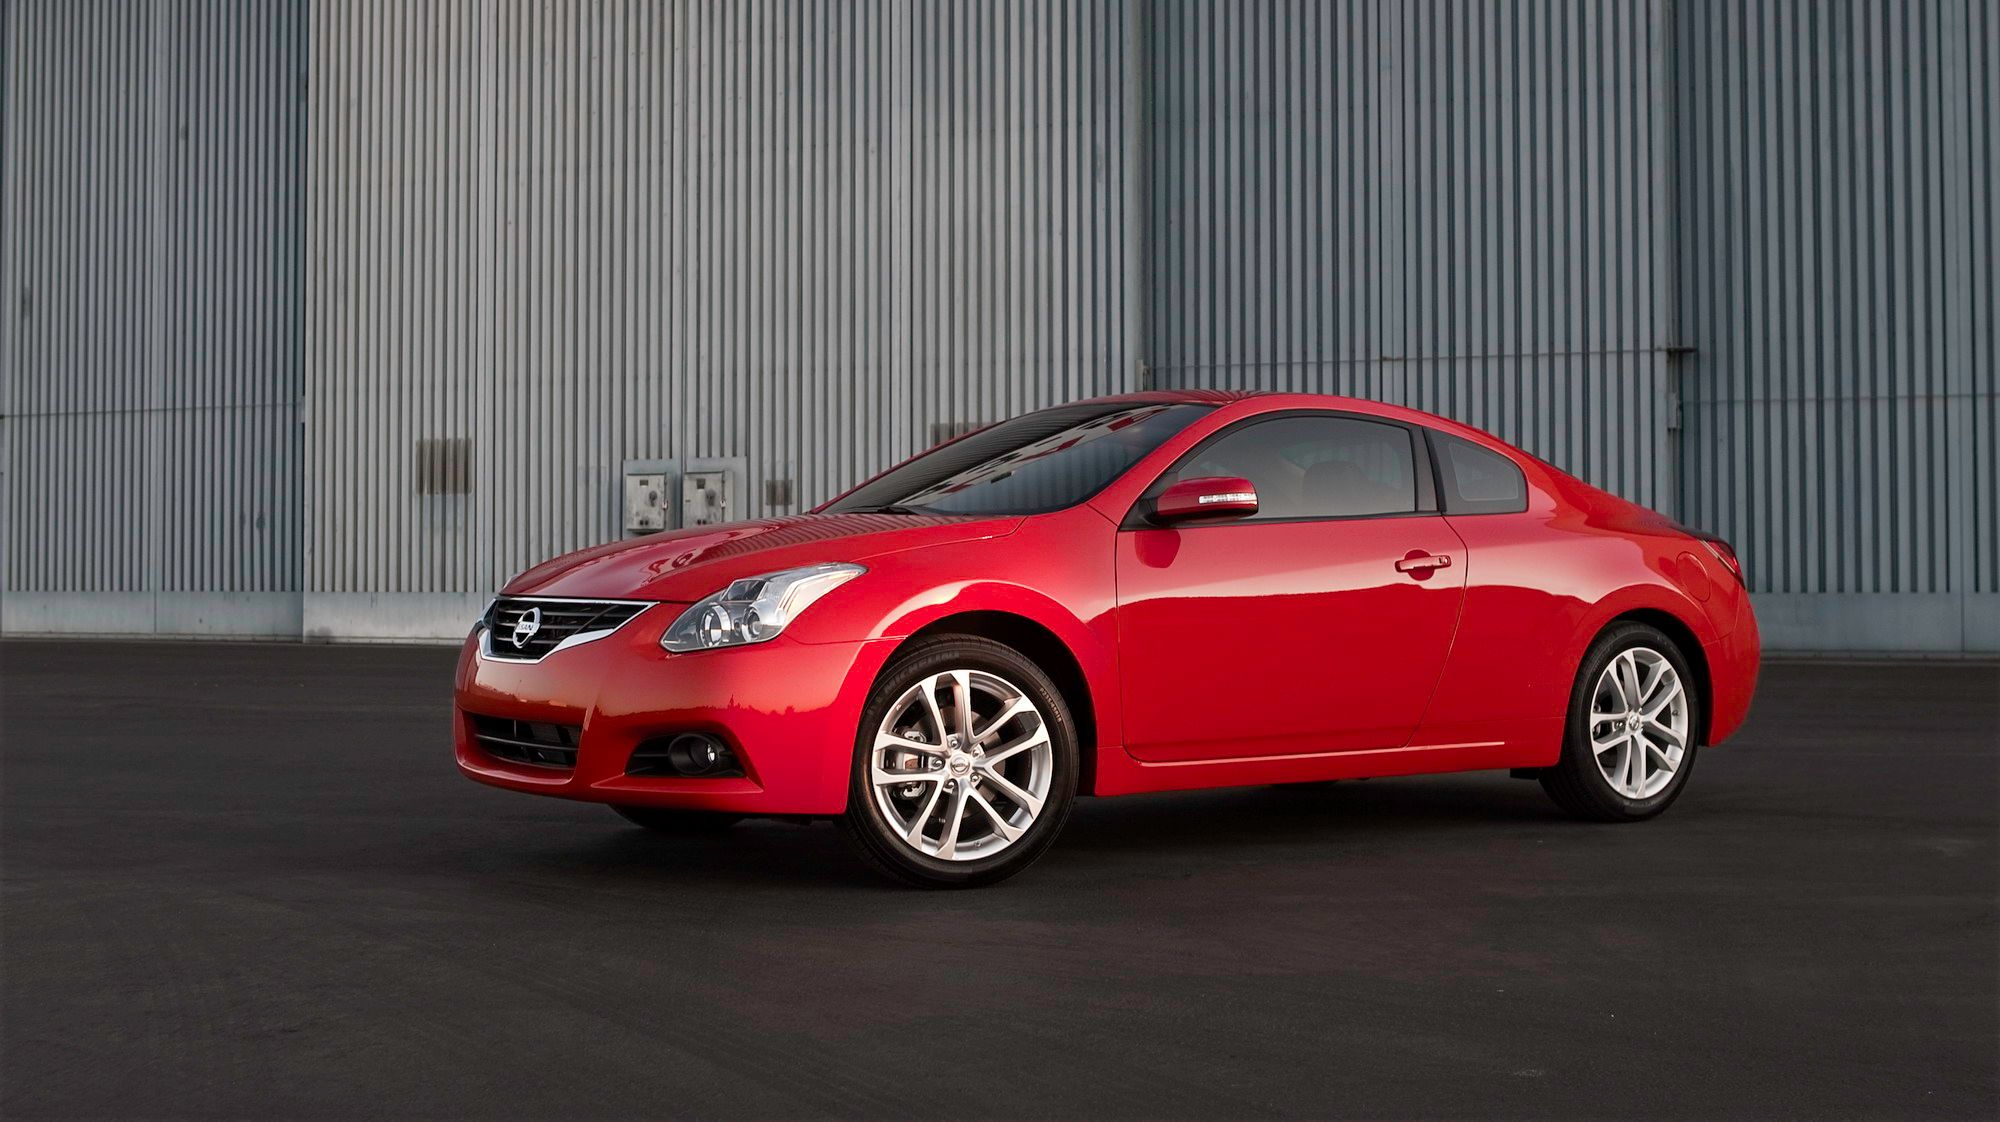 2011 Nissan Altima Coupe